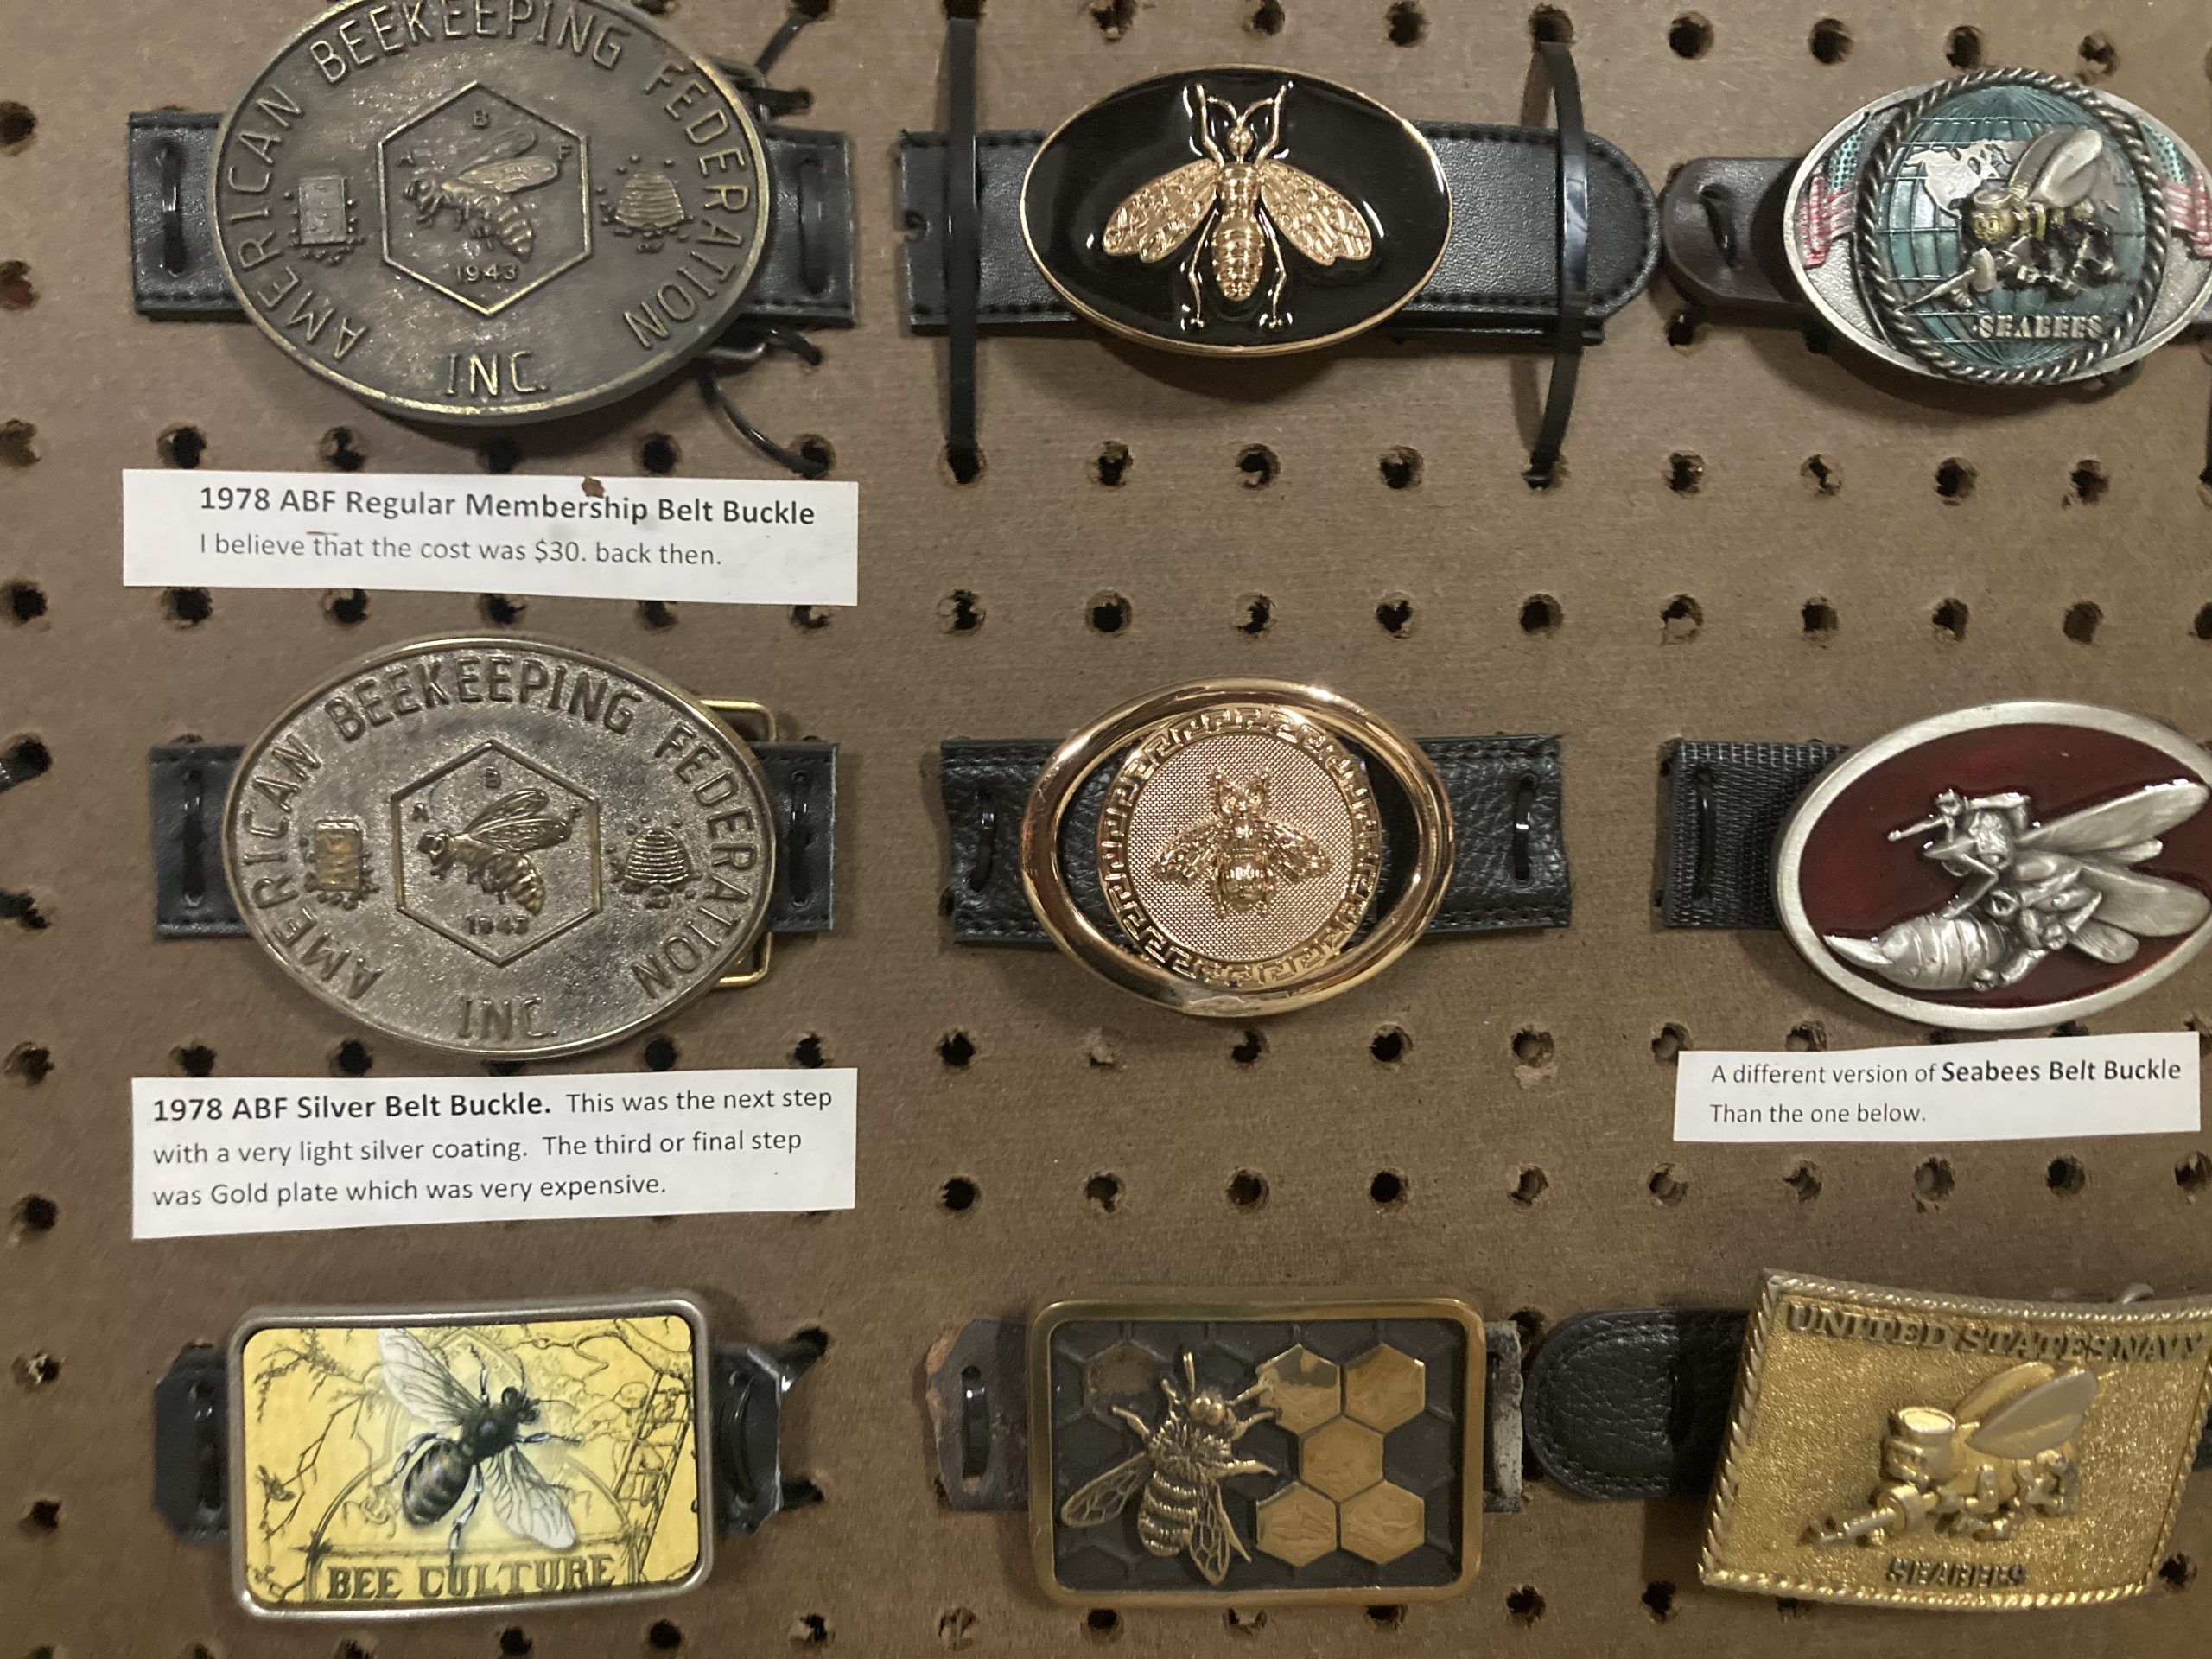 An example of three boards containing belt buckles related to honey bees and beekeeping.